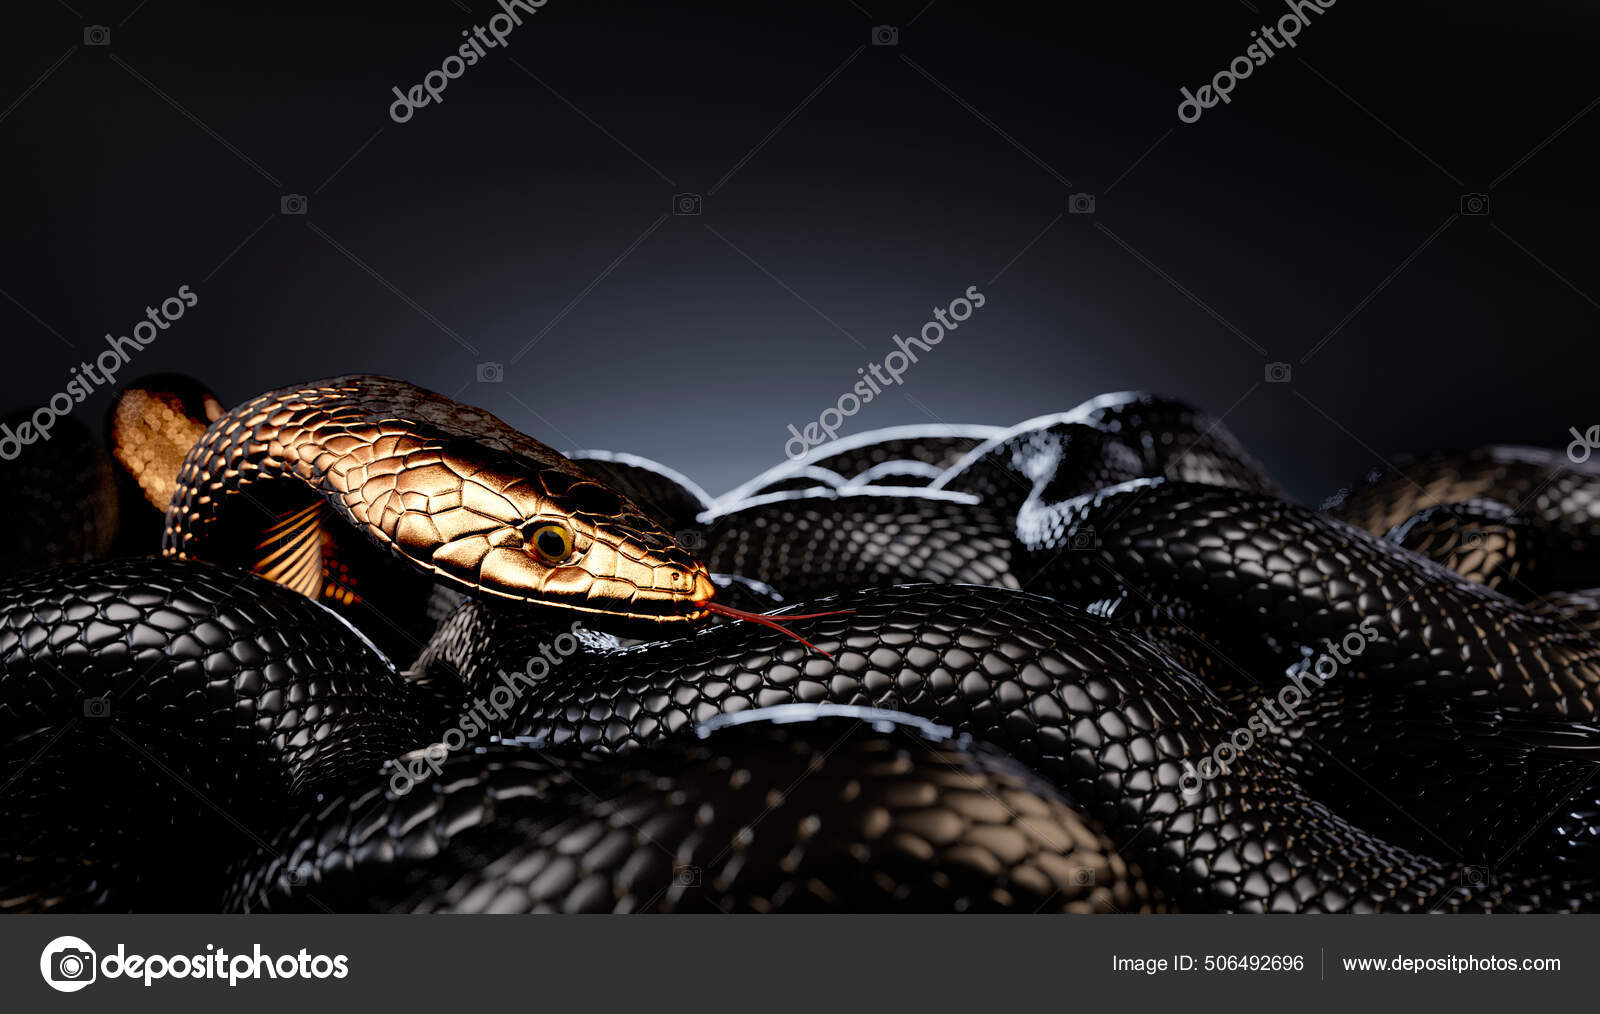 Black Snake Mobile Photo iPhone Wallpapers Free Download